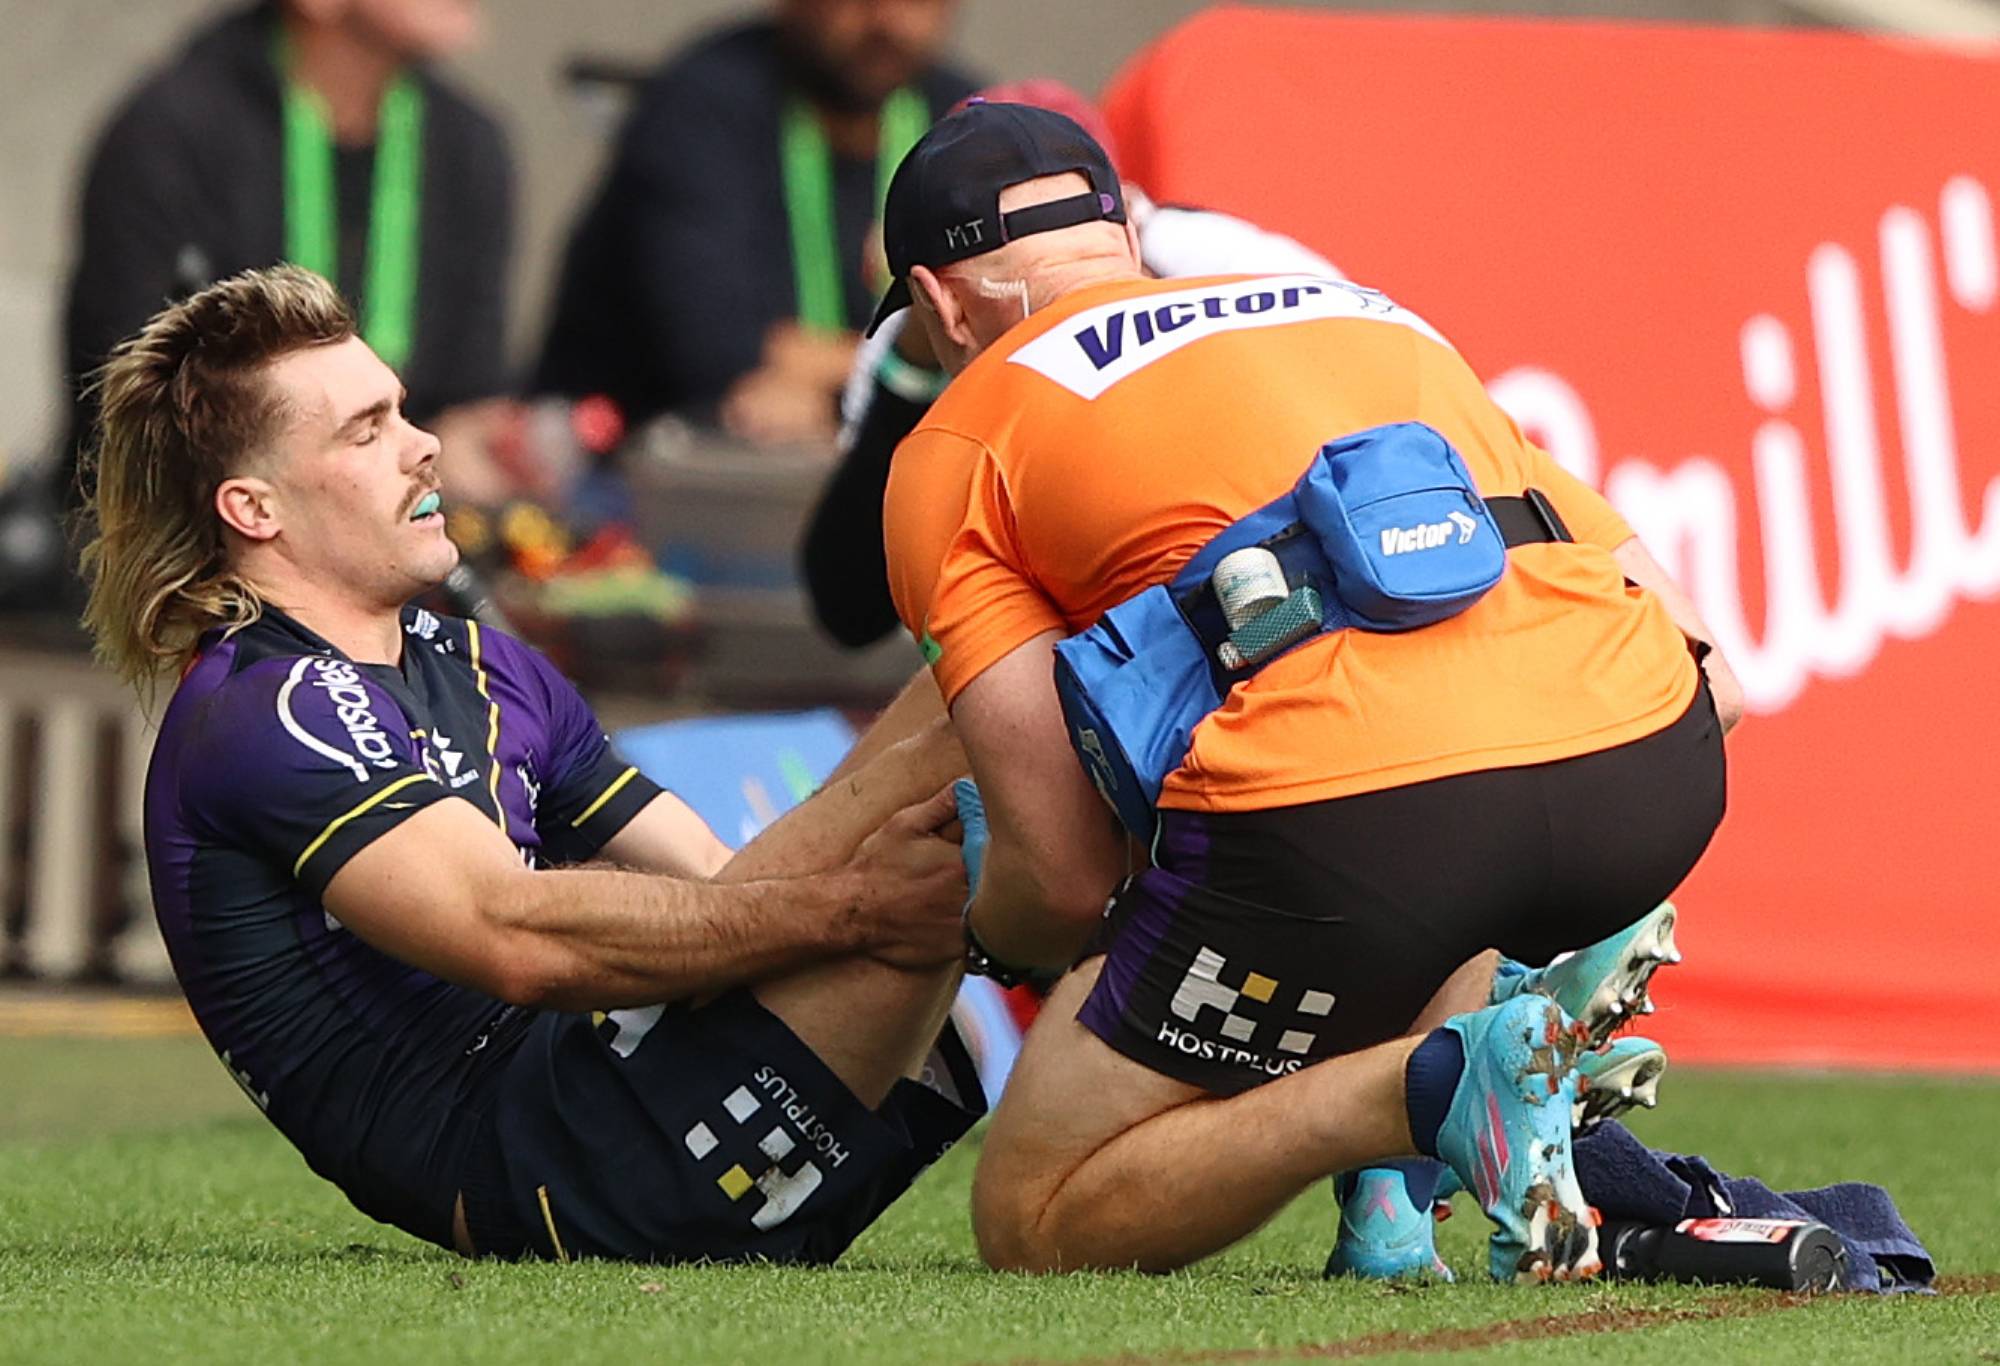 MELBOURNE, AUSTRALIA - MAY 08: Ryan Papenhuyzen of the Storm is checked for a possible injury during the round nine NRL match between the Melbourne Storm and the St George Illawarra Dragons at AAMI Park, on May 08, 2022, in Melbourne, Australia. (Photo by Robert Cianflone/Getty Images)